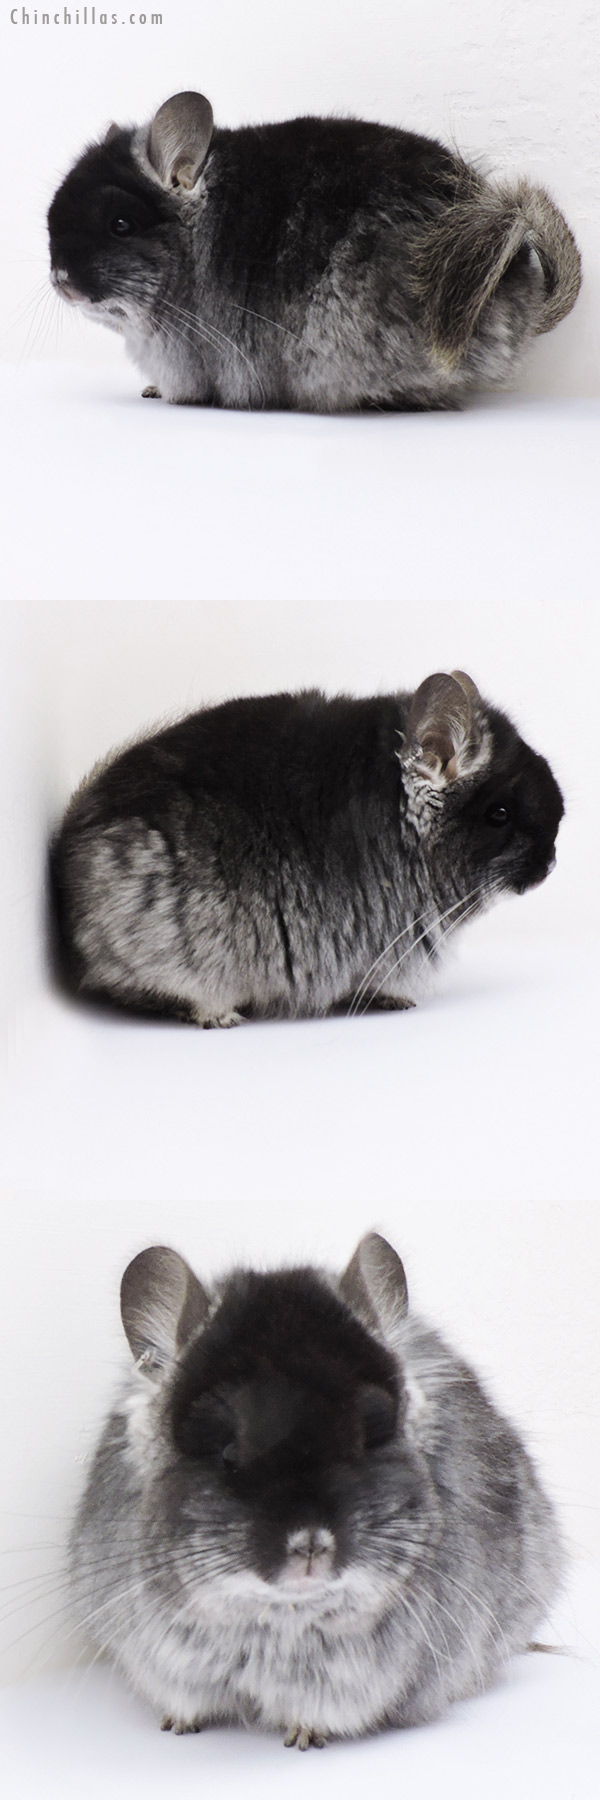 Chinchilla or related item offered for sale or export on Chinchillas.com - 18280 Exceptional Brevi Type Black Velvet  Royal Persian Angora Female Chinchilla